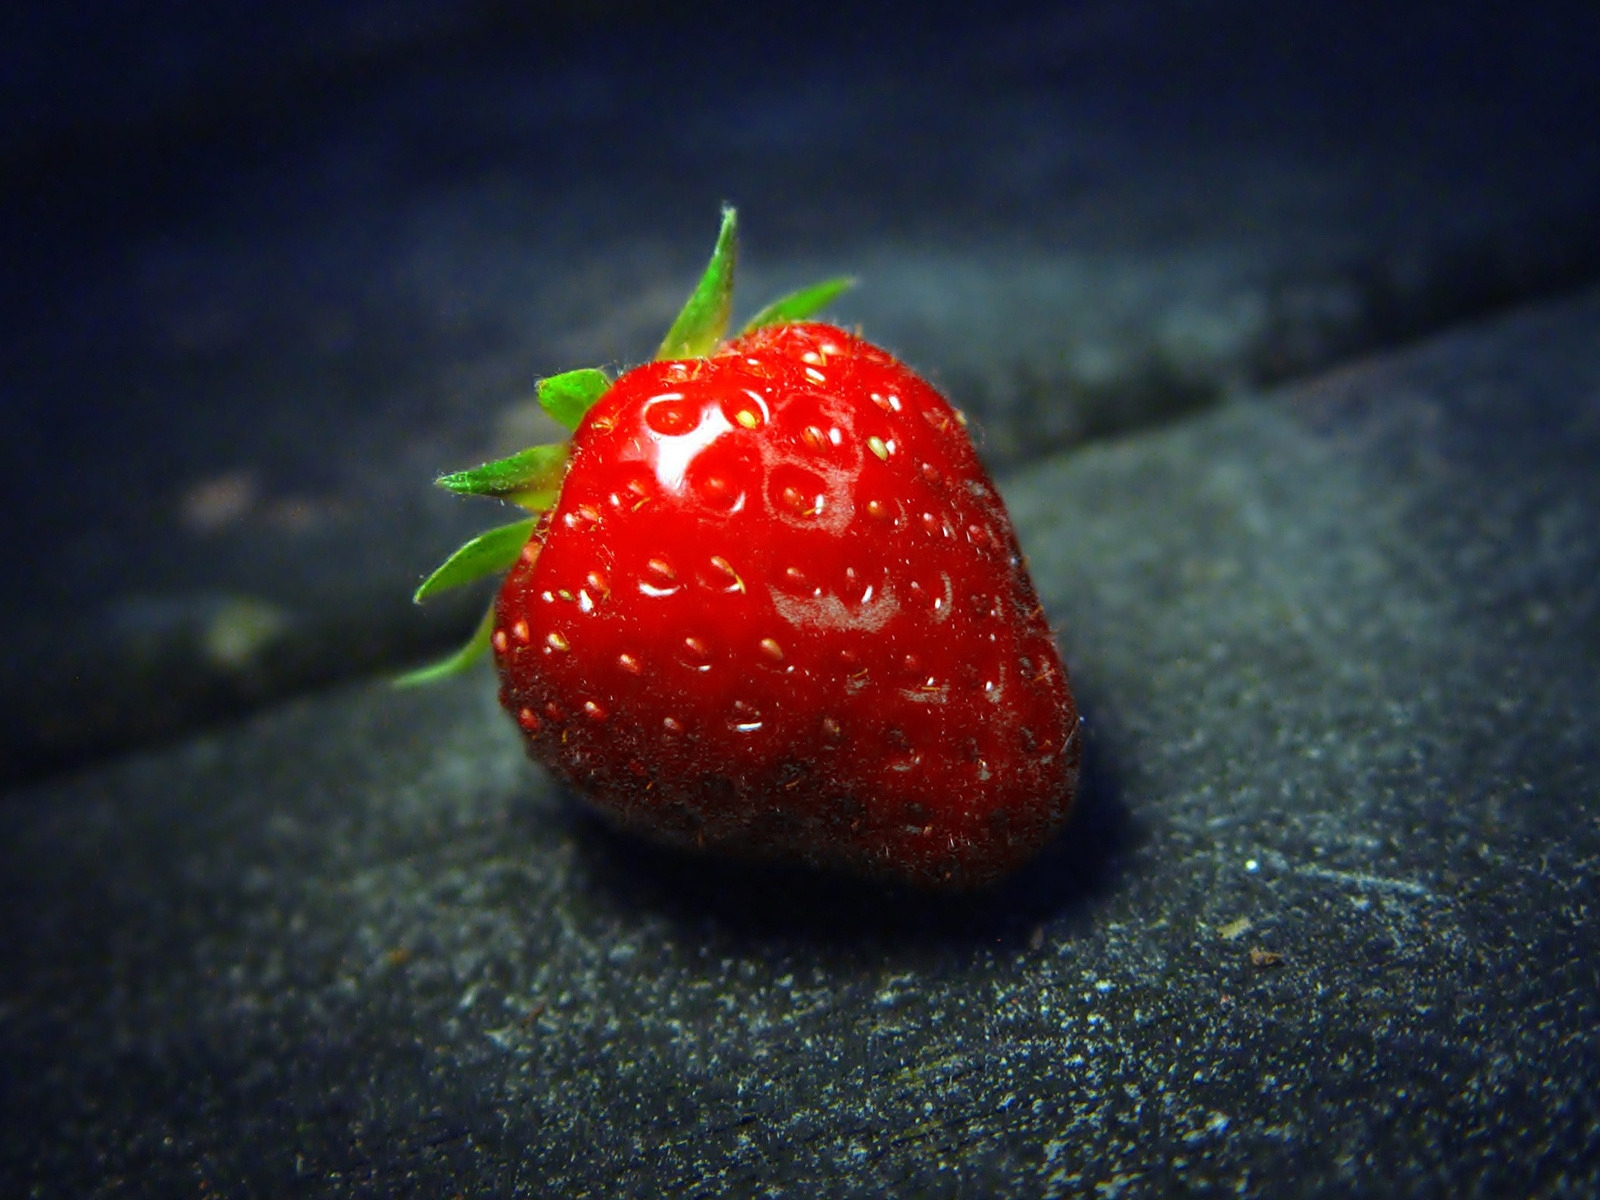 The Strawberry for 1600 x 1200 resolution